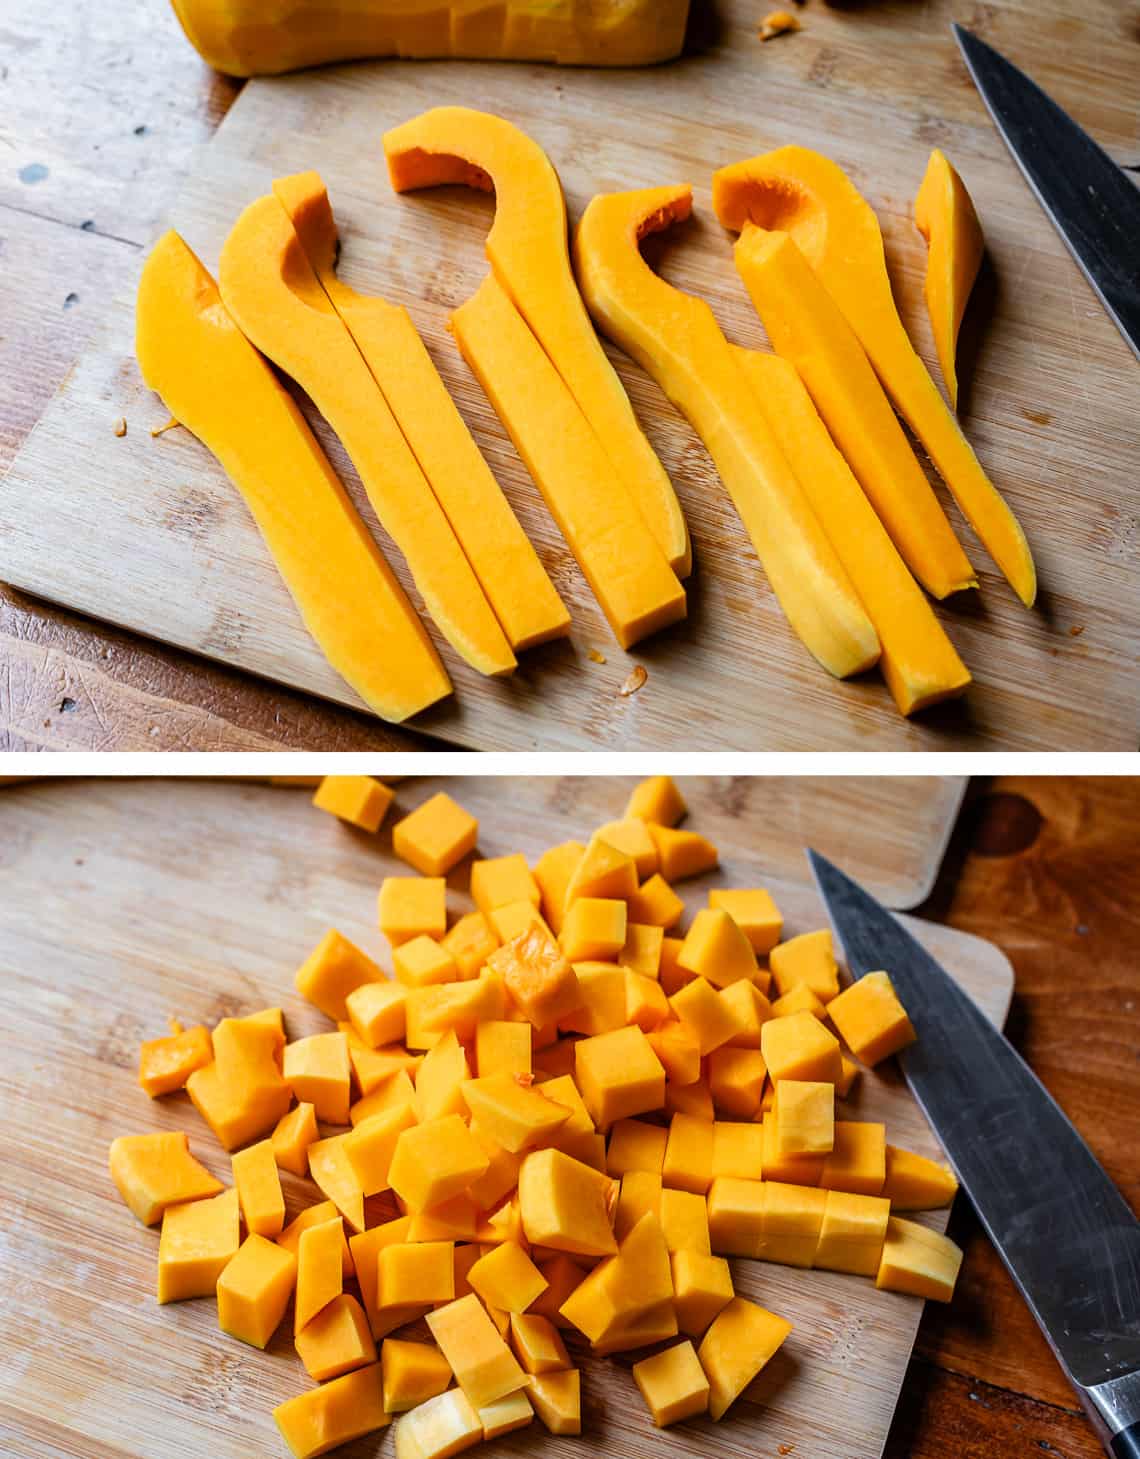 top long slices of butternut squash after peeling, bottom chopped 1" pieces of squash.